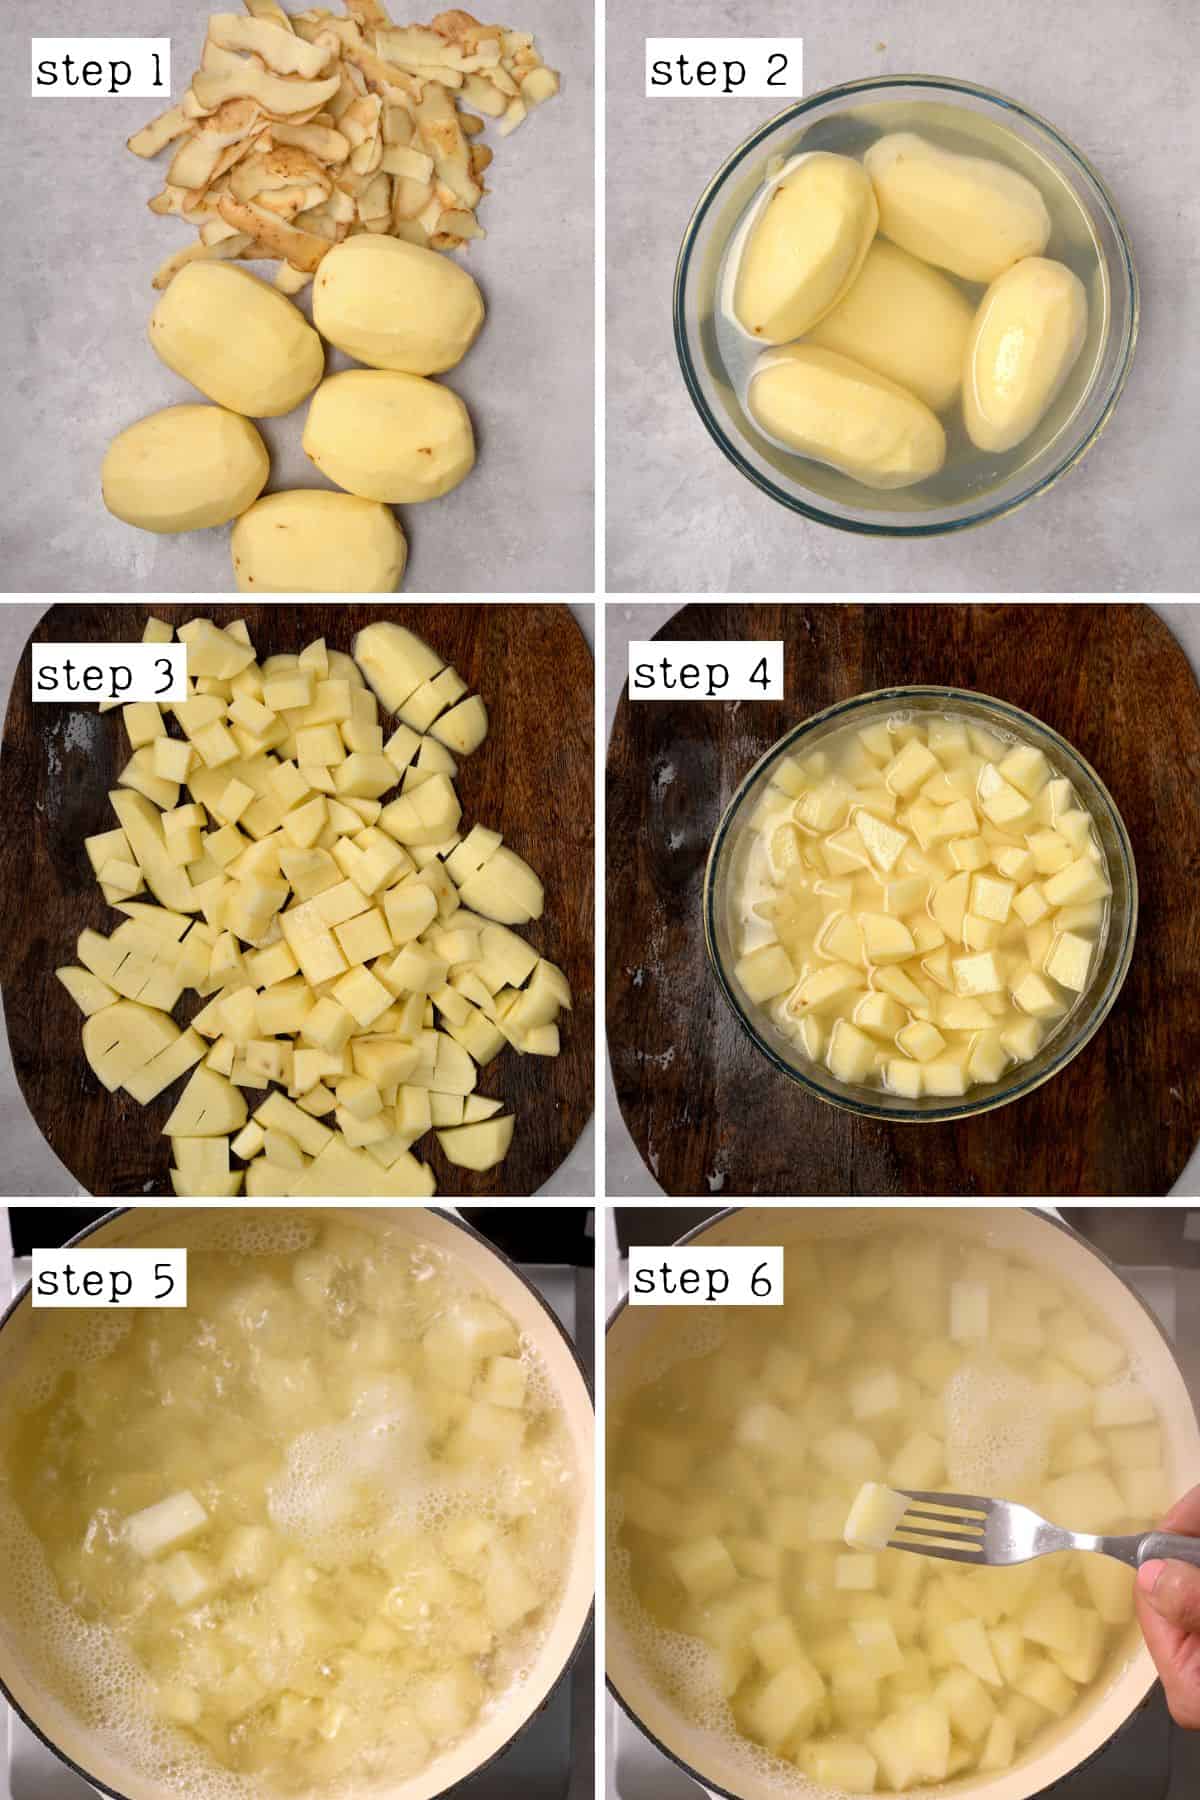 Steps for peeling, cutting, and boiling potatoes